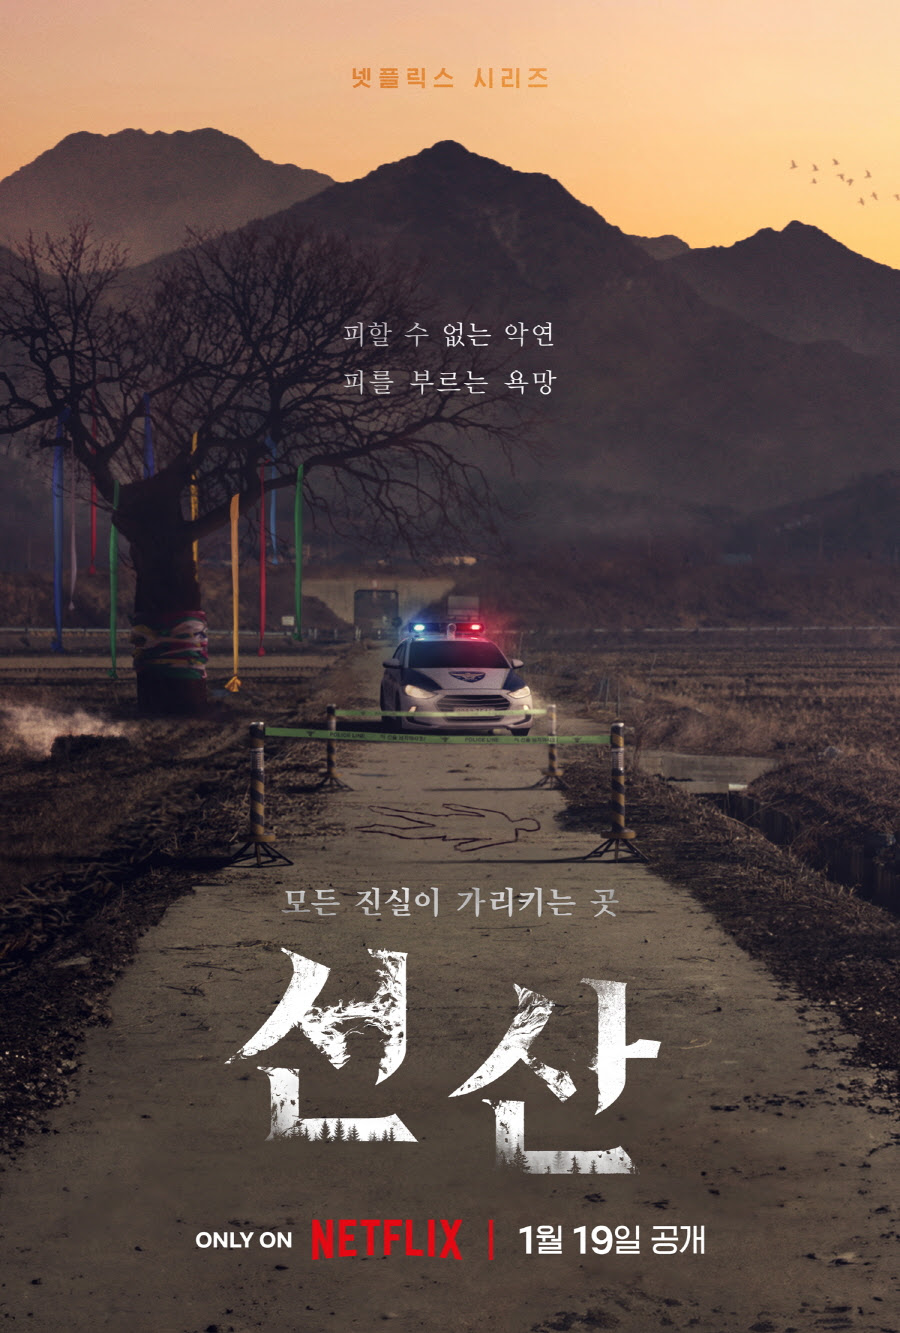 'Seonsan', written and planned by director Yeon Sang-ho, will be released on Netflix on January 19th.